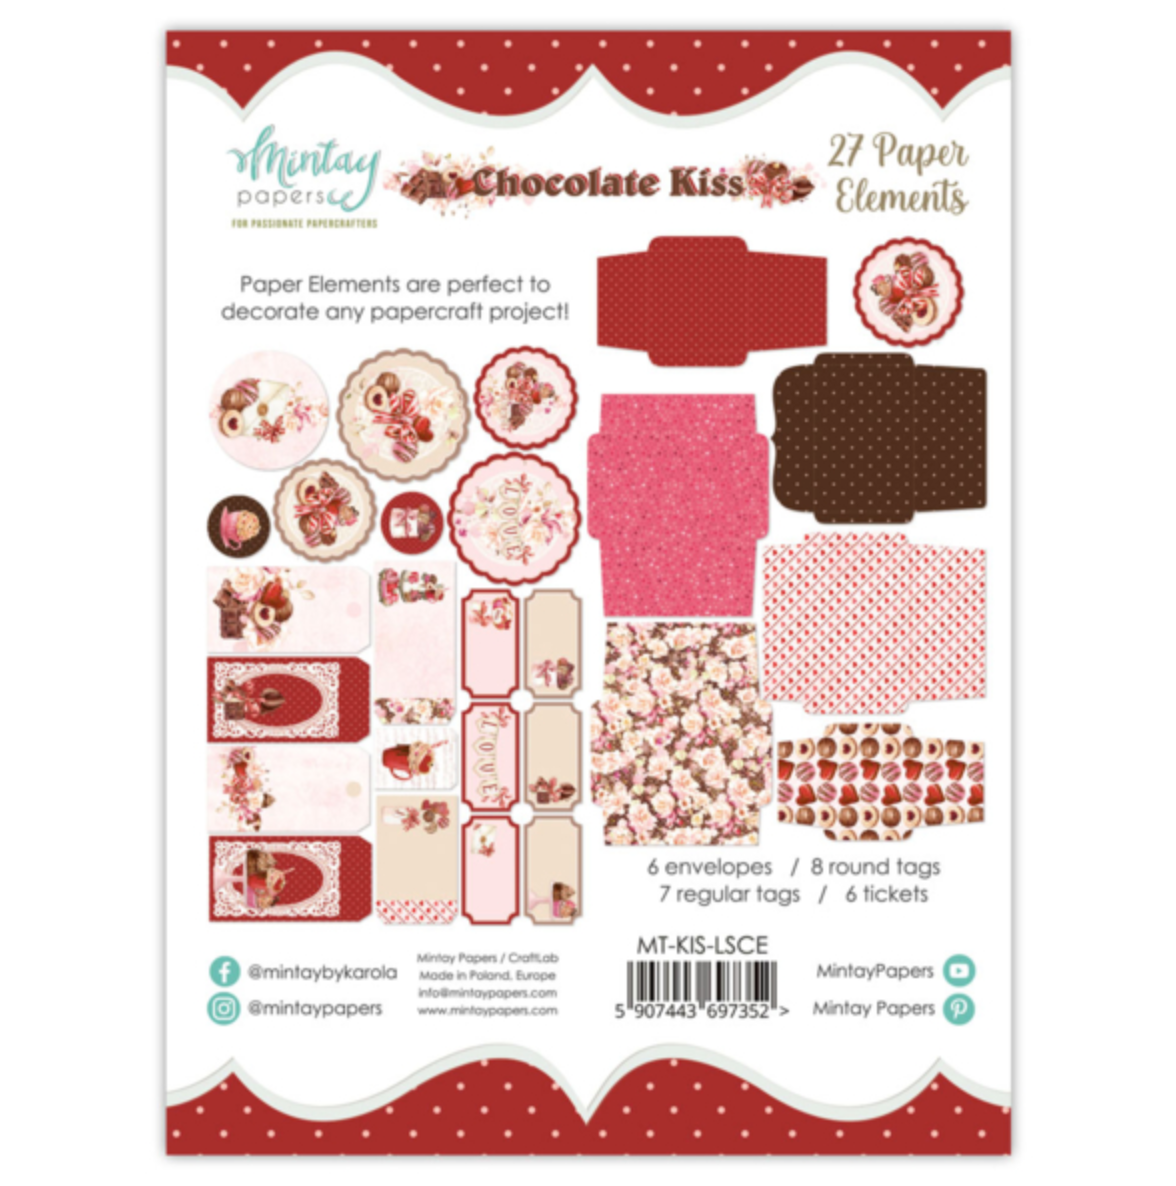 Chocolate Kiss - Paper Elements - 27 pcs - Mintay Papers